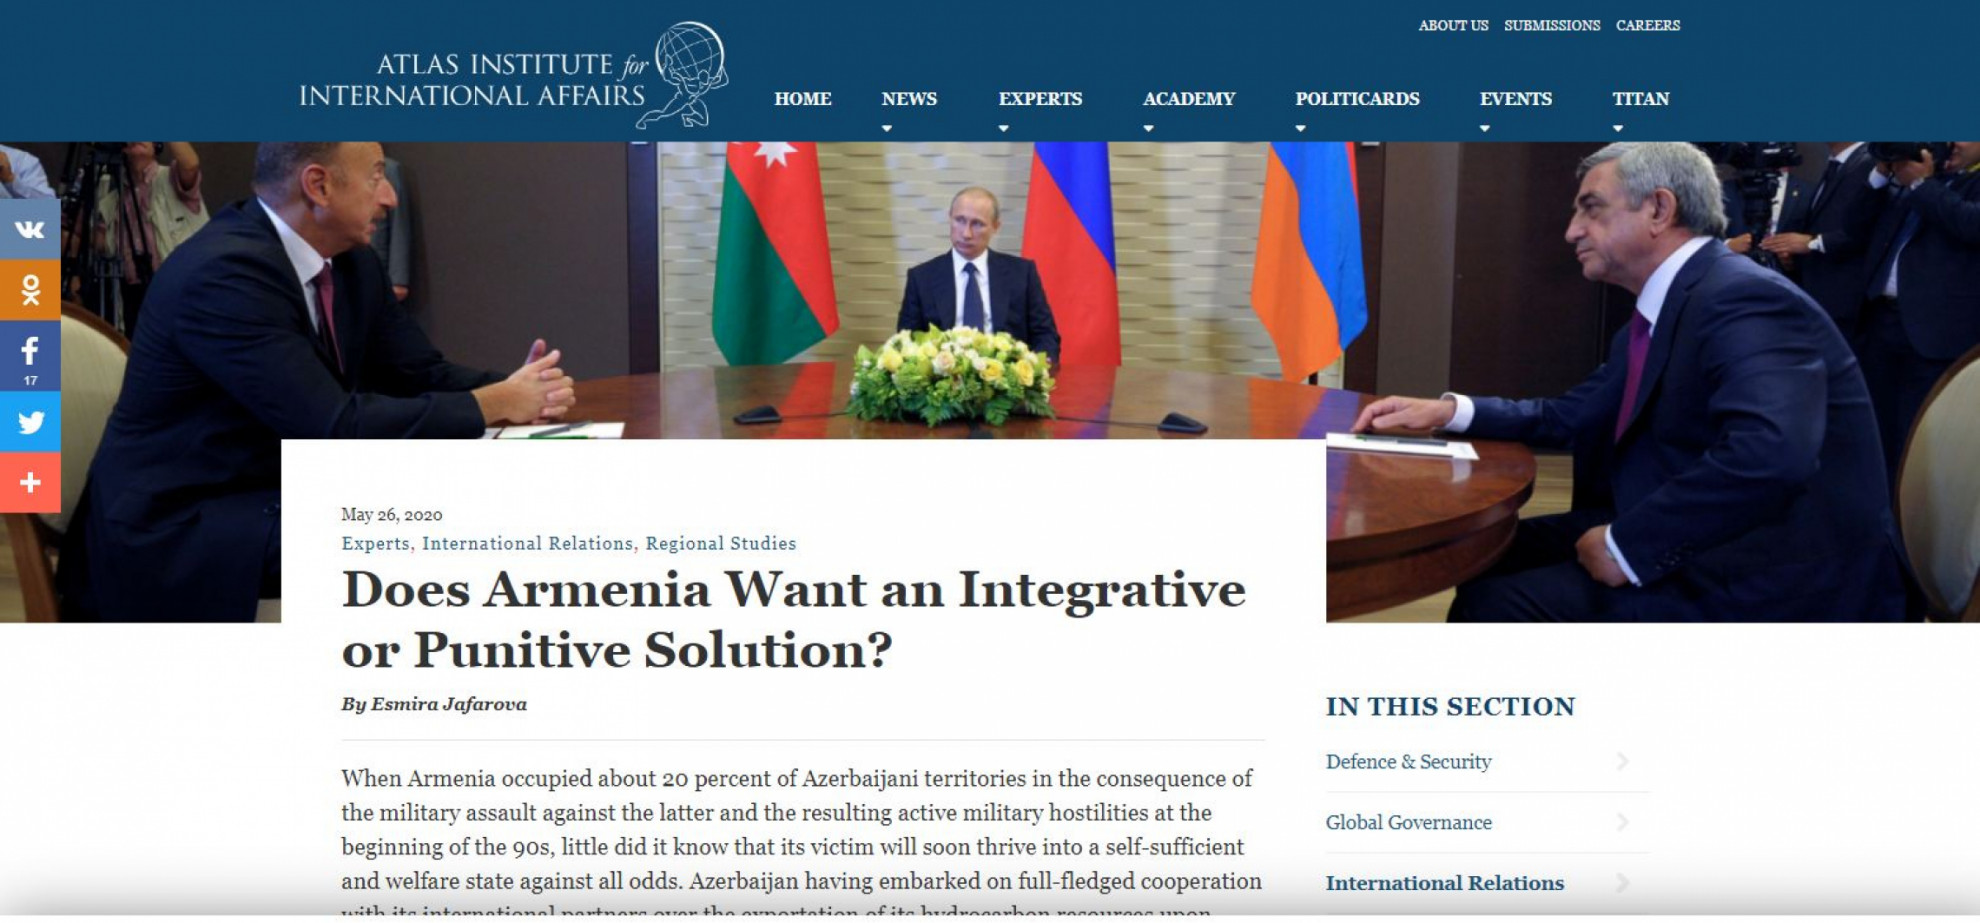 Does Armenia Want an Integrative or Punitive Solution?